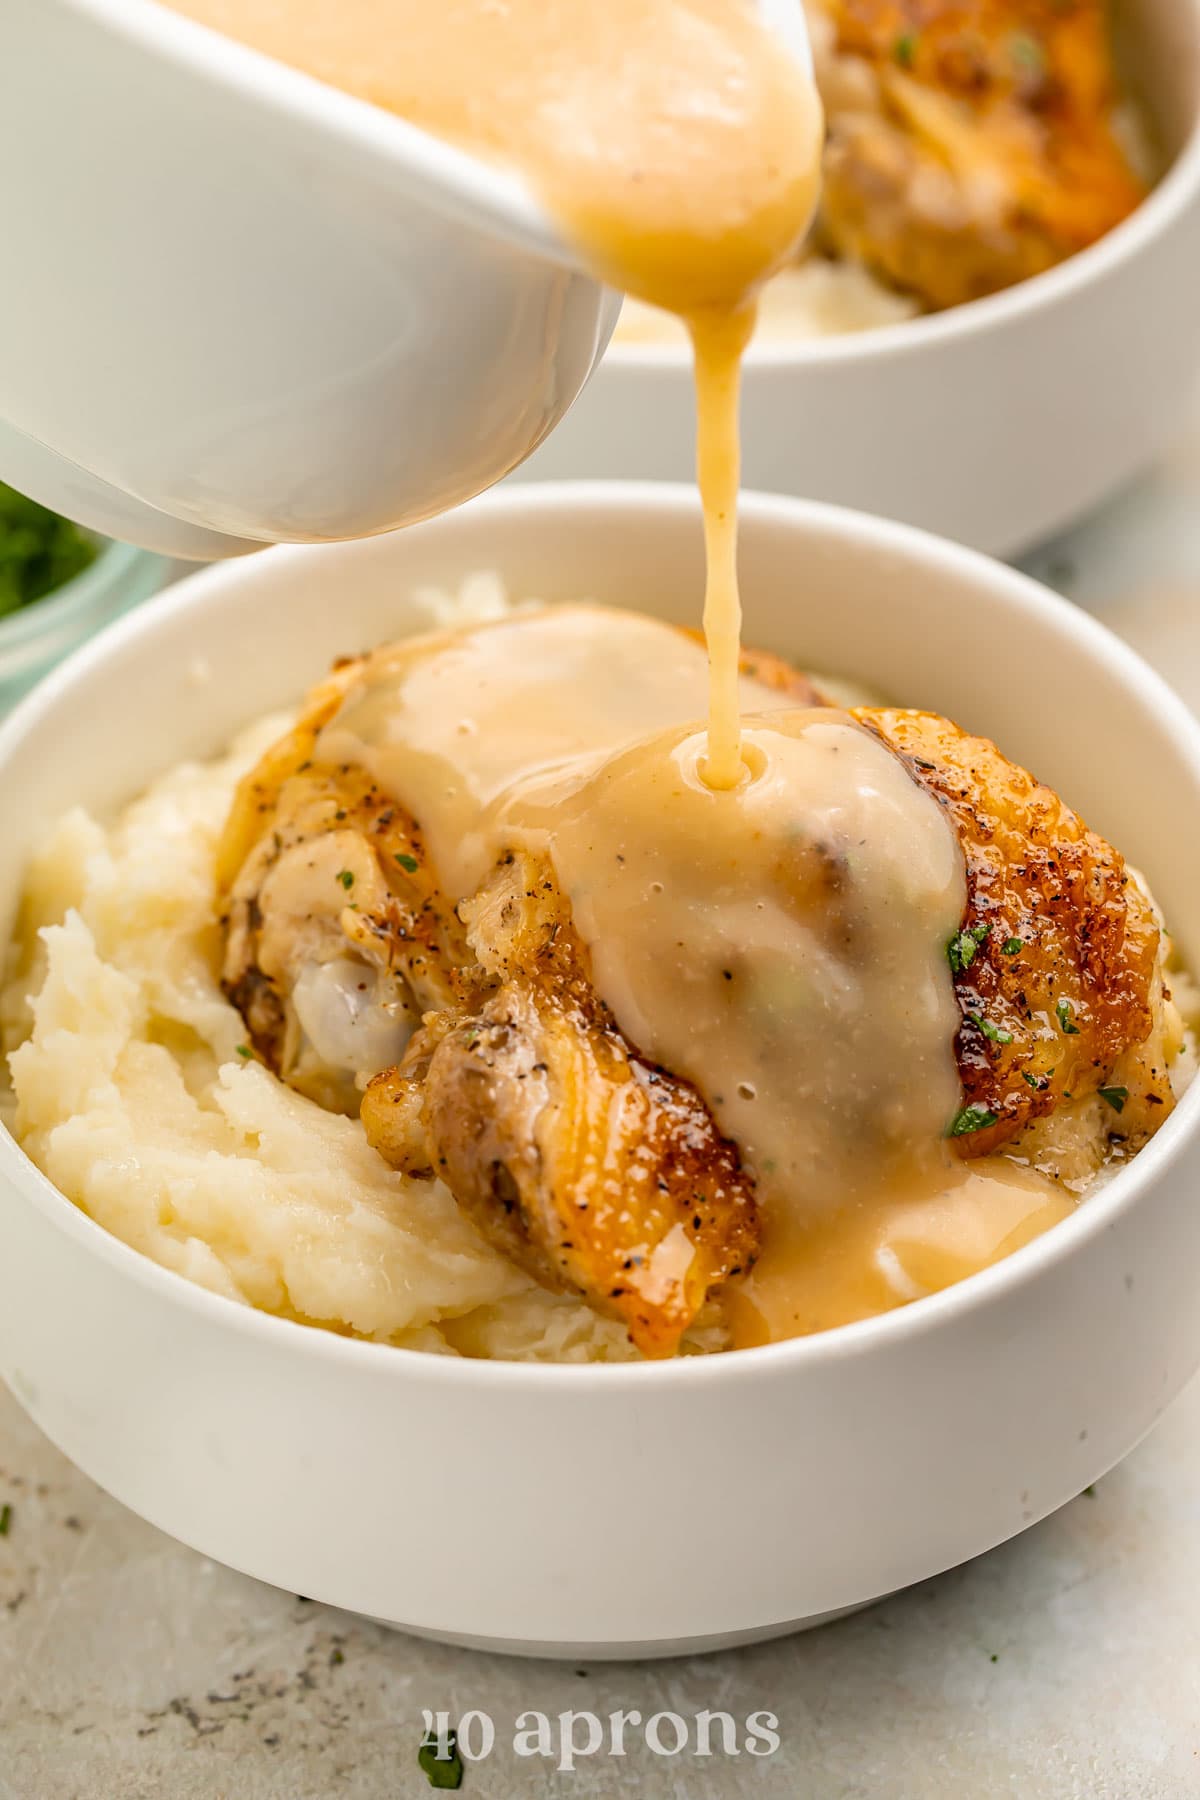 A chicken thigh, cooked in the Instant Pot, resting on top of mashed potatoes in a white bowl with gravy being poured over the chicken.